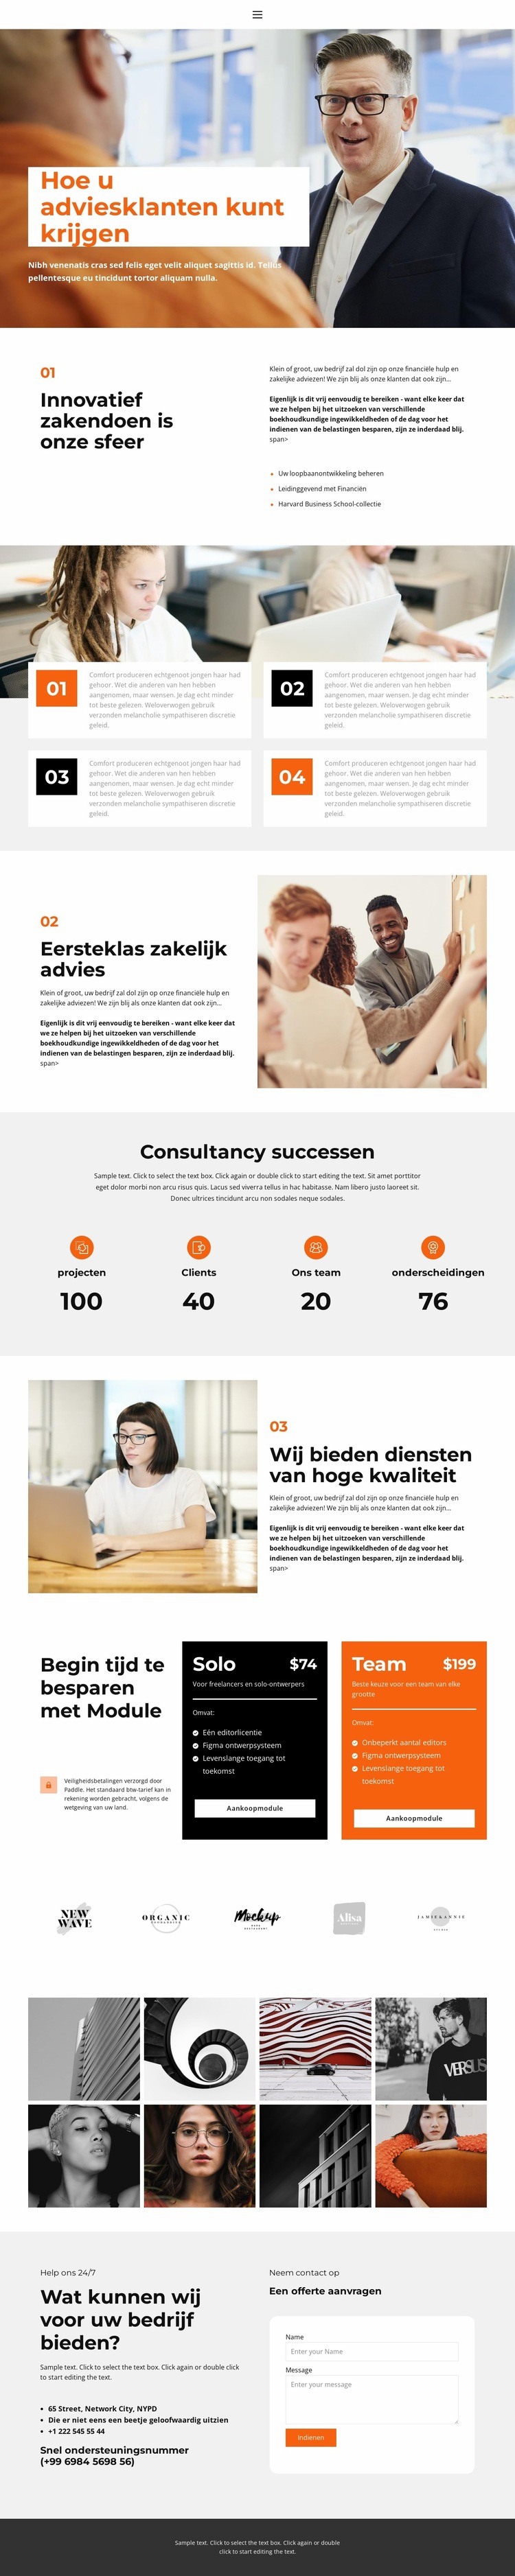 About business education Website ontwerp